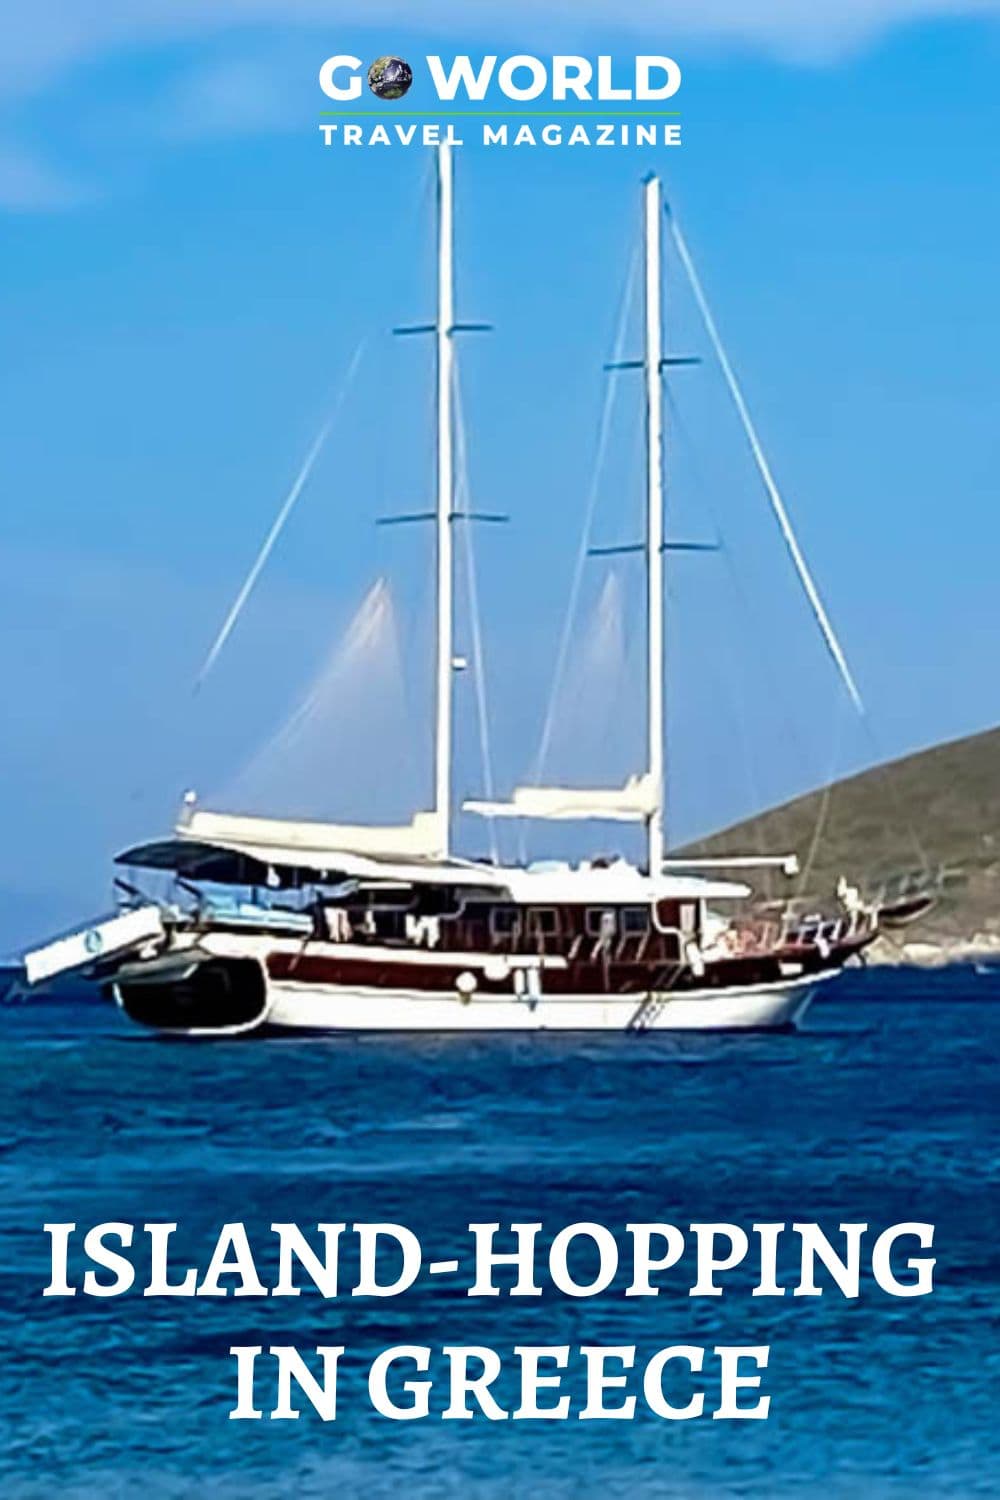 A Greece island hopping voyage that takes you to some of the most beautiful, off-the-beaten-path isles on a gorgeous, intimate yacht. #islandhoppinggreece #greekislands